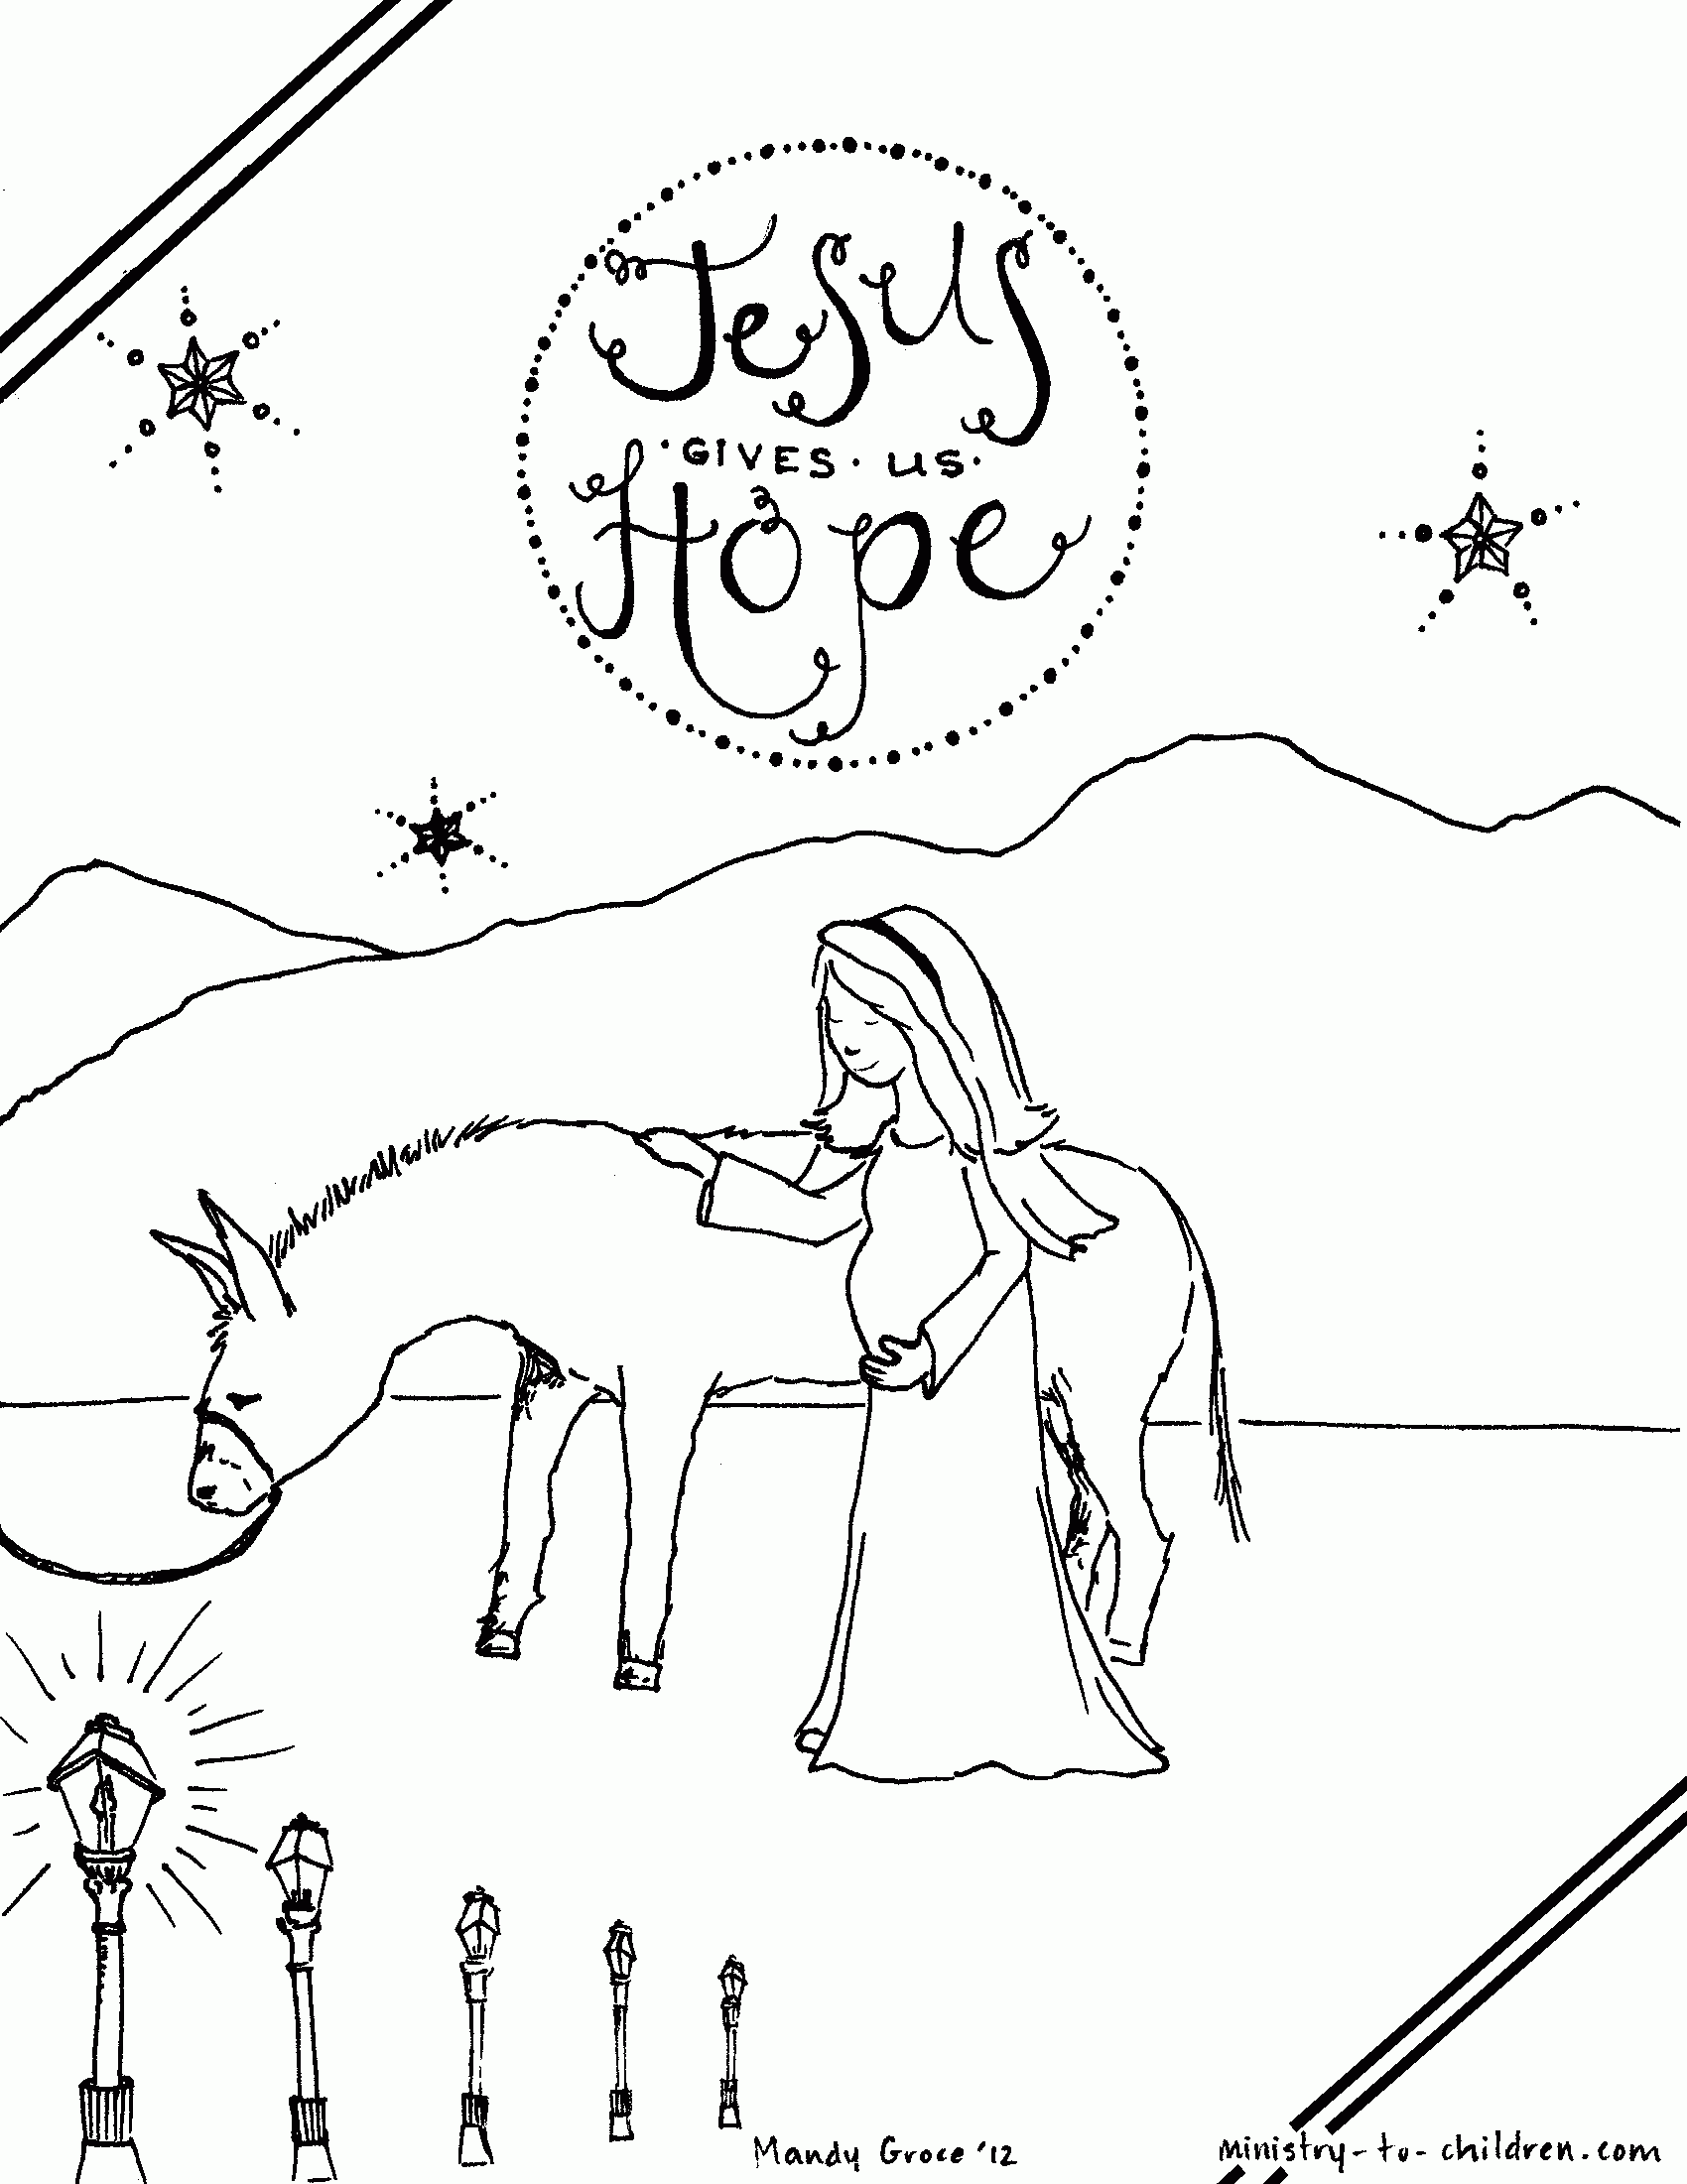 Document Free Nativity Advent Coloring Pages - Widetheme